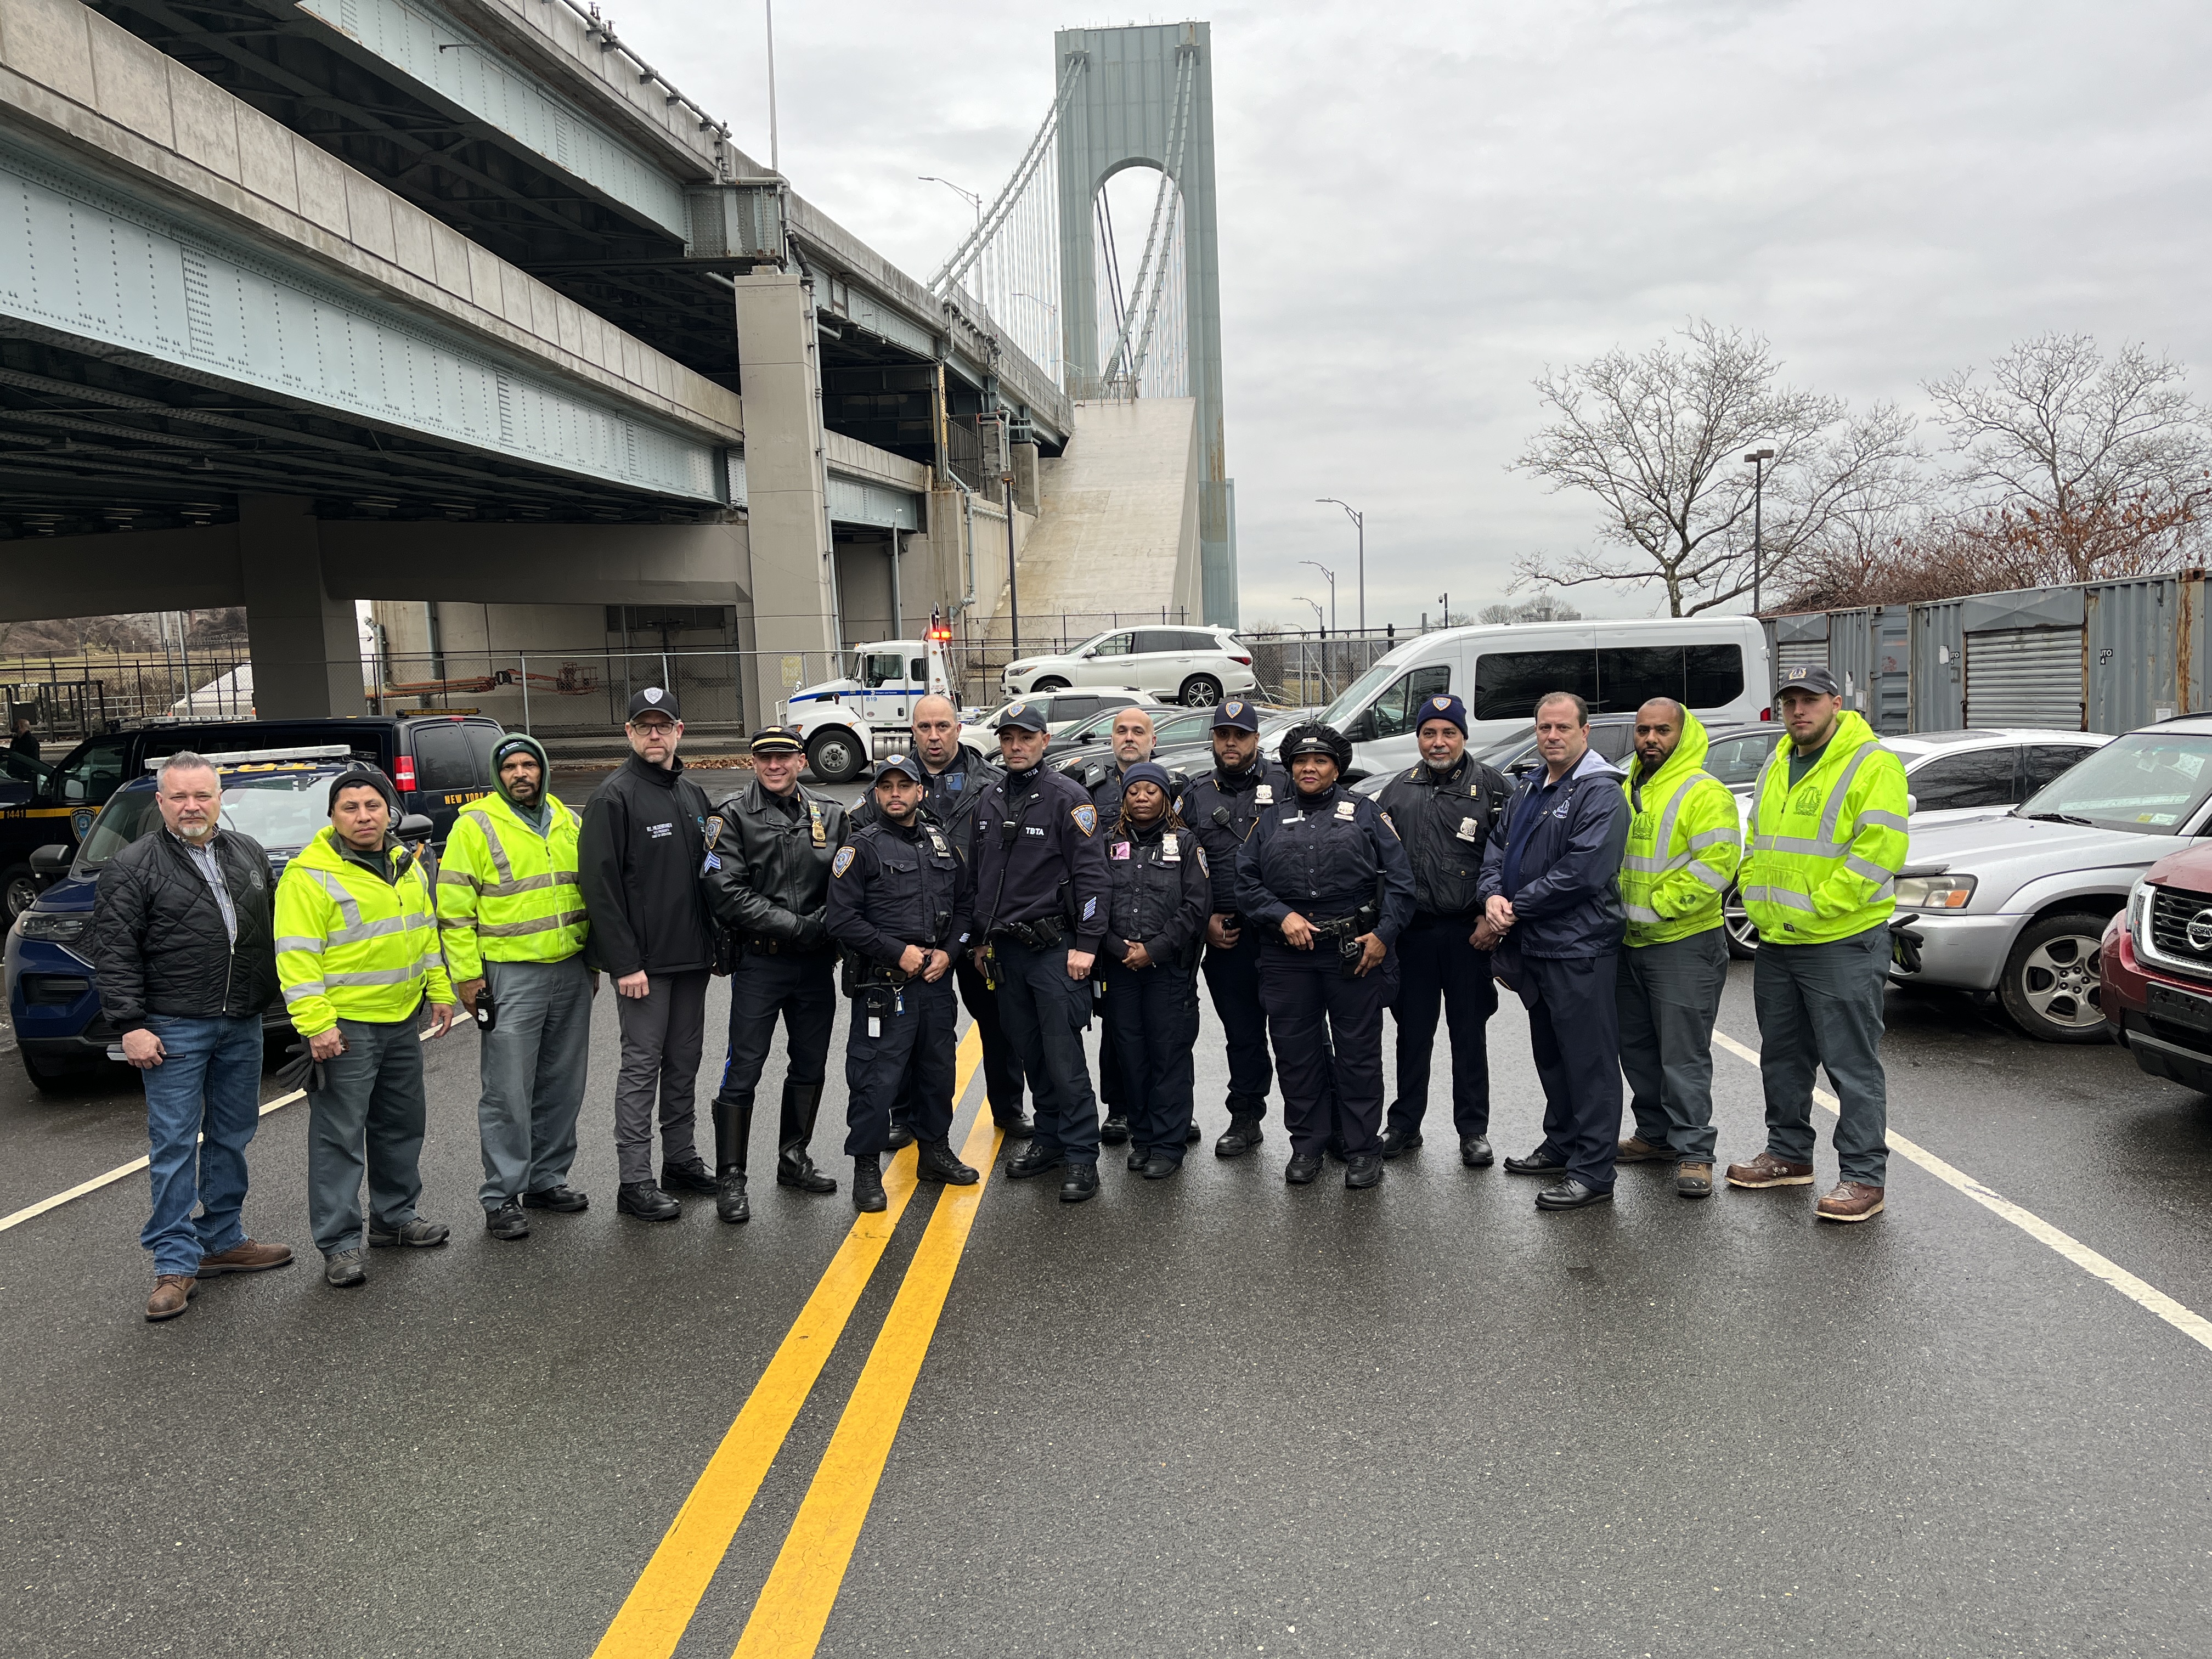 Eventually we'll get you': MTA nabs toll evaders with fines totaling $400K  in record-breaking crackdown at Verrazzano 